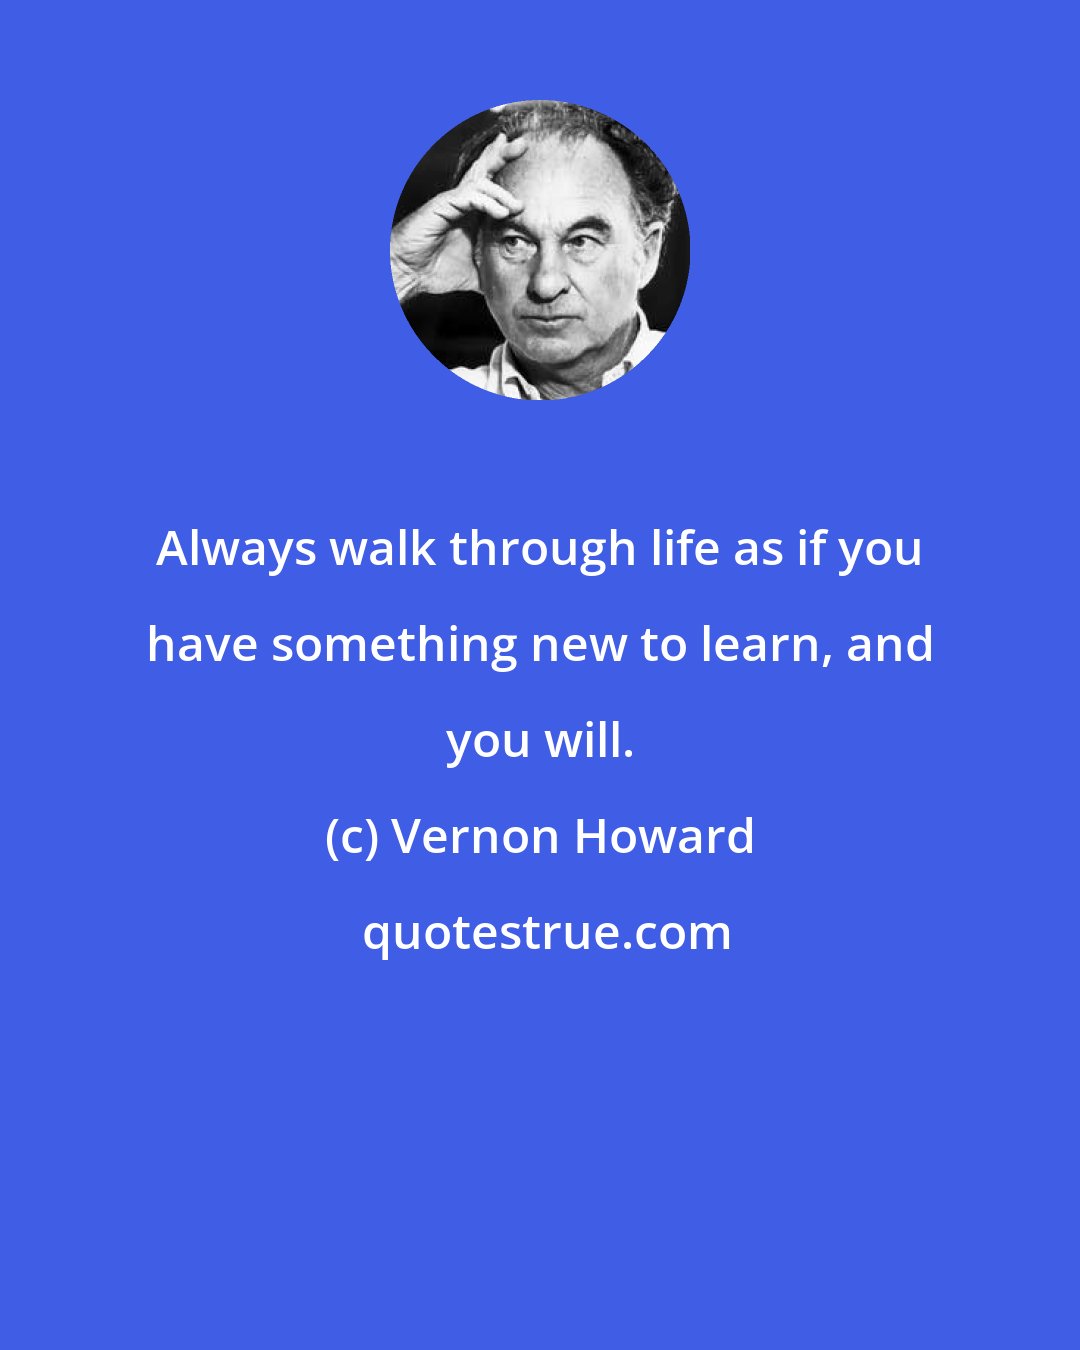 Vernon Howard: Always walk through life as if you have something new to learn, and you will.